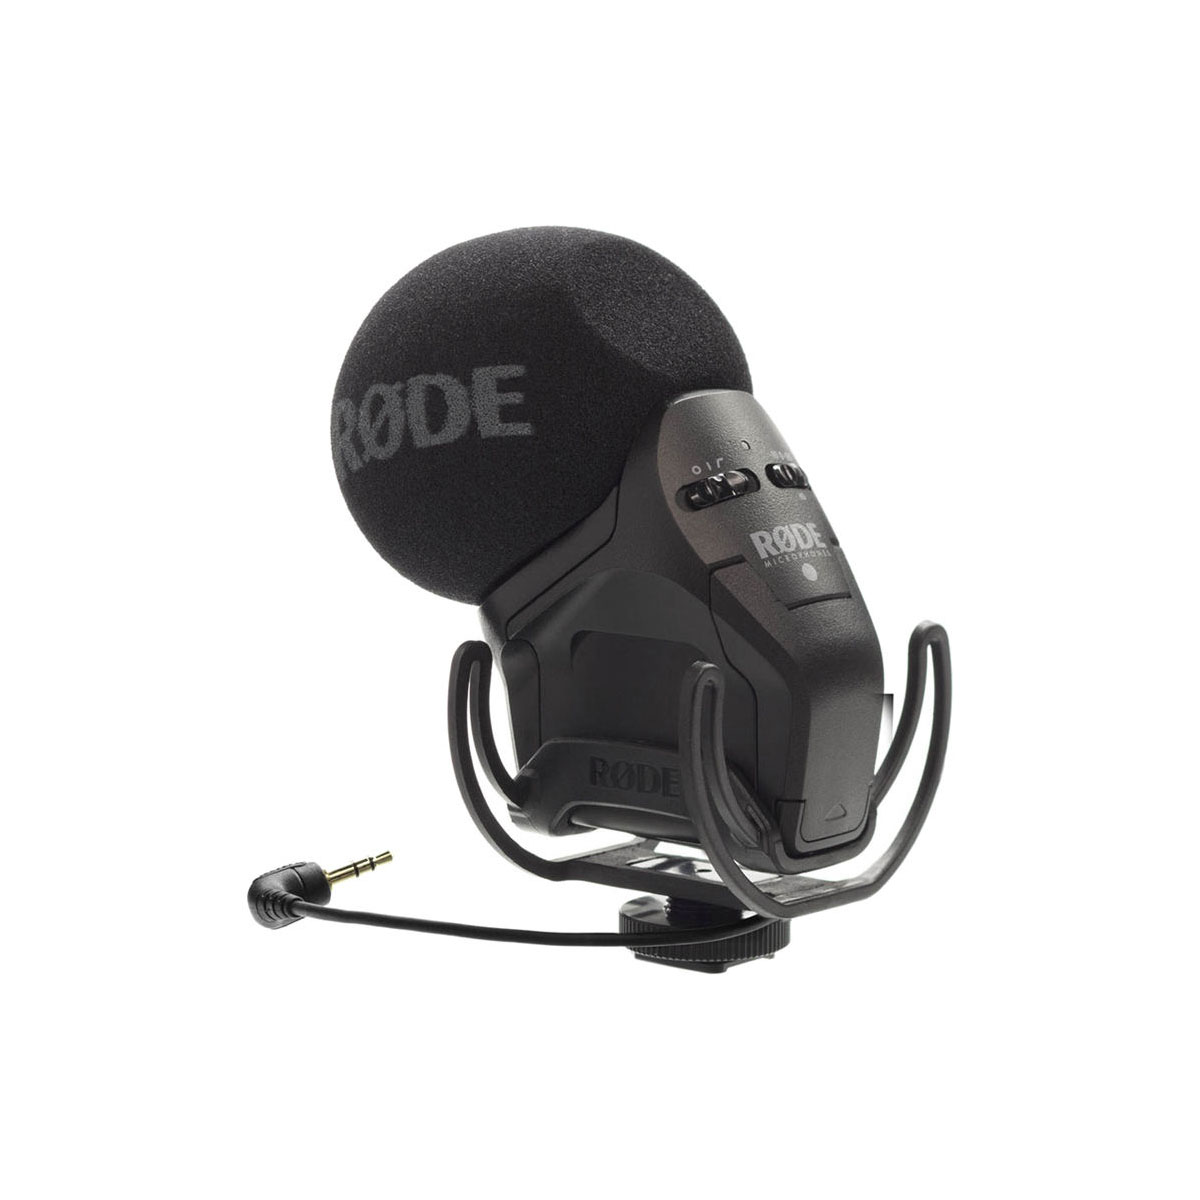 Coherent tack On the verge Rode Stereo VideoMic Pro Rycote - The Camera Exchange